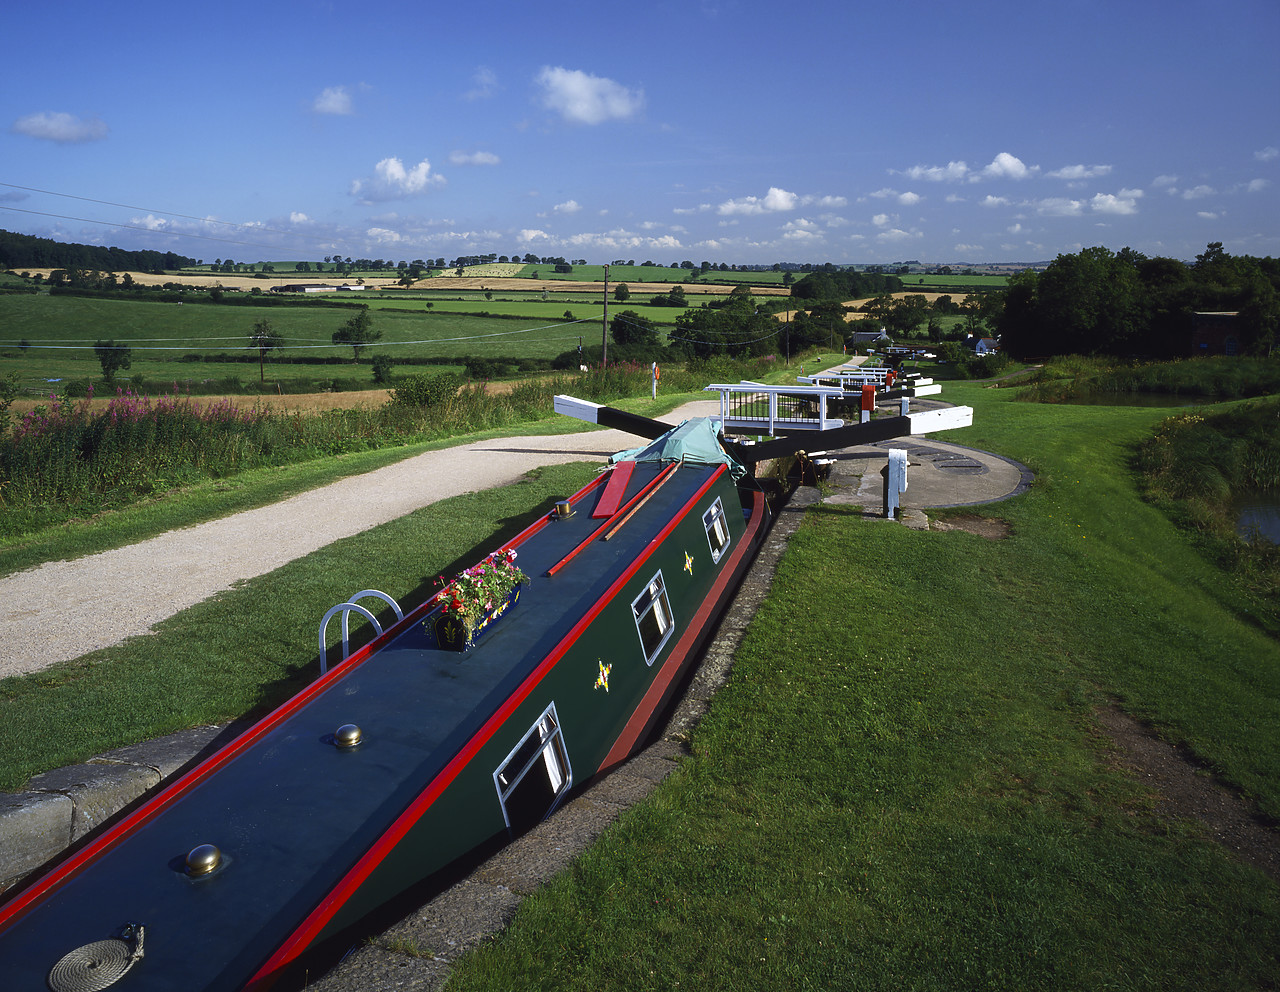 #924092-2 - Canal Boat in Foxton Locks, Leicestershire, England